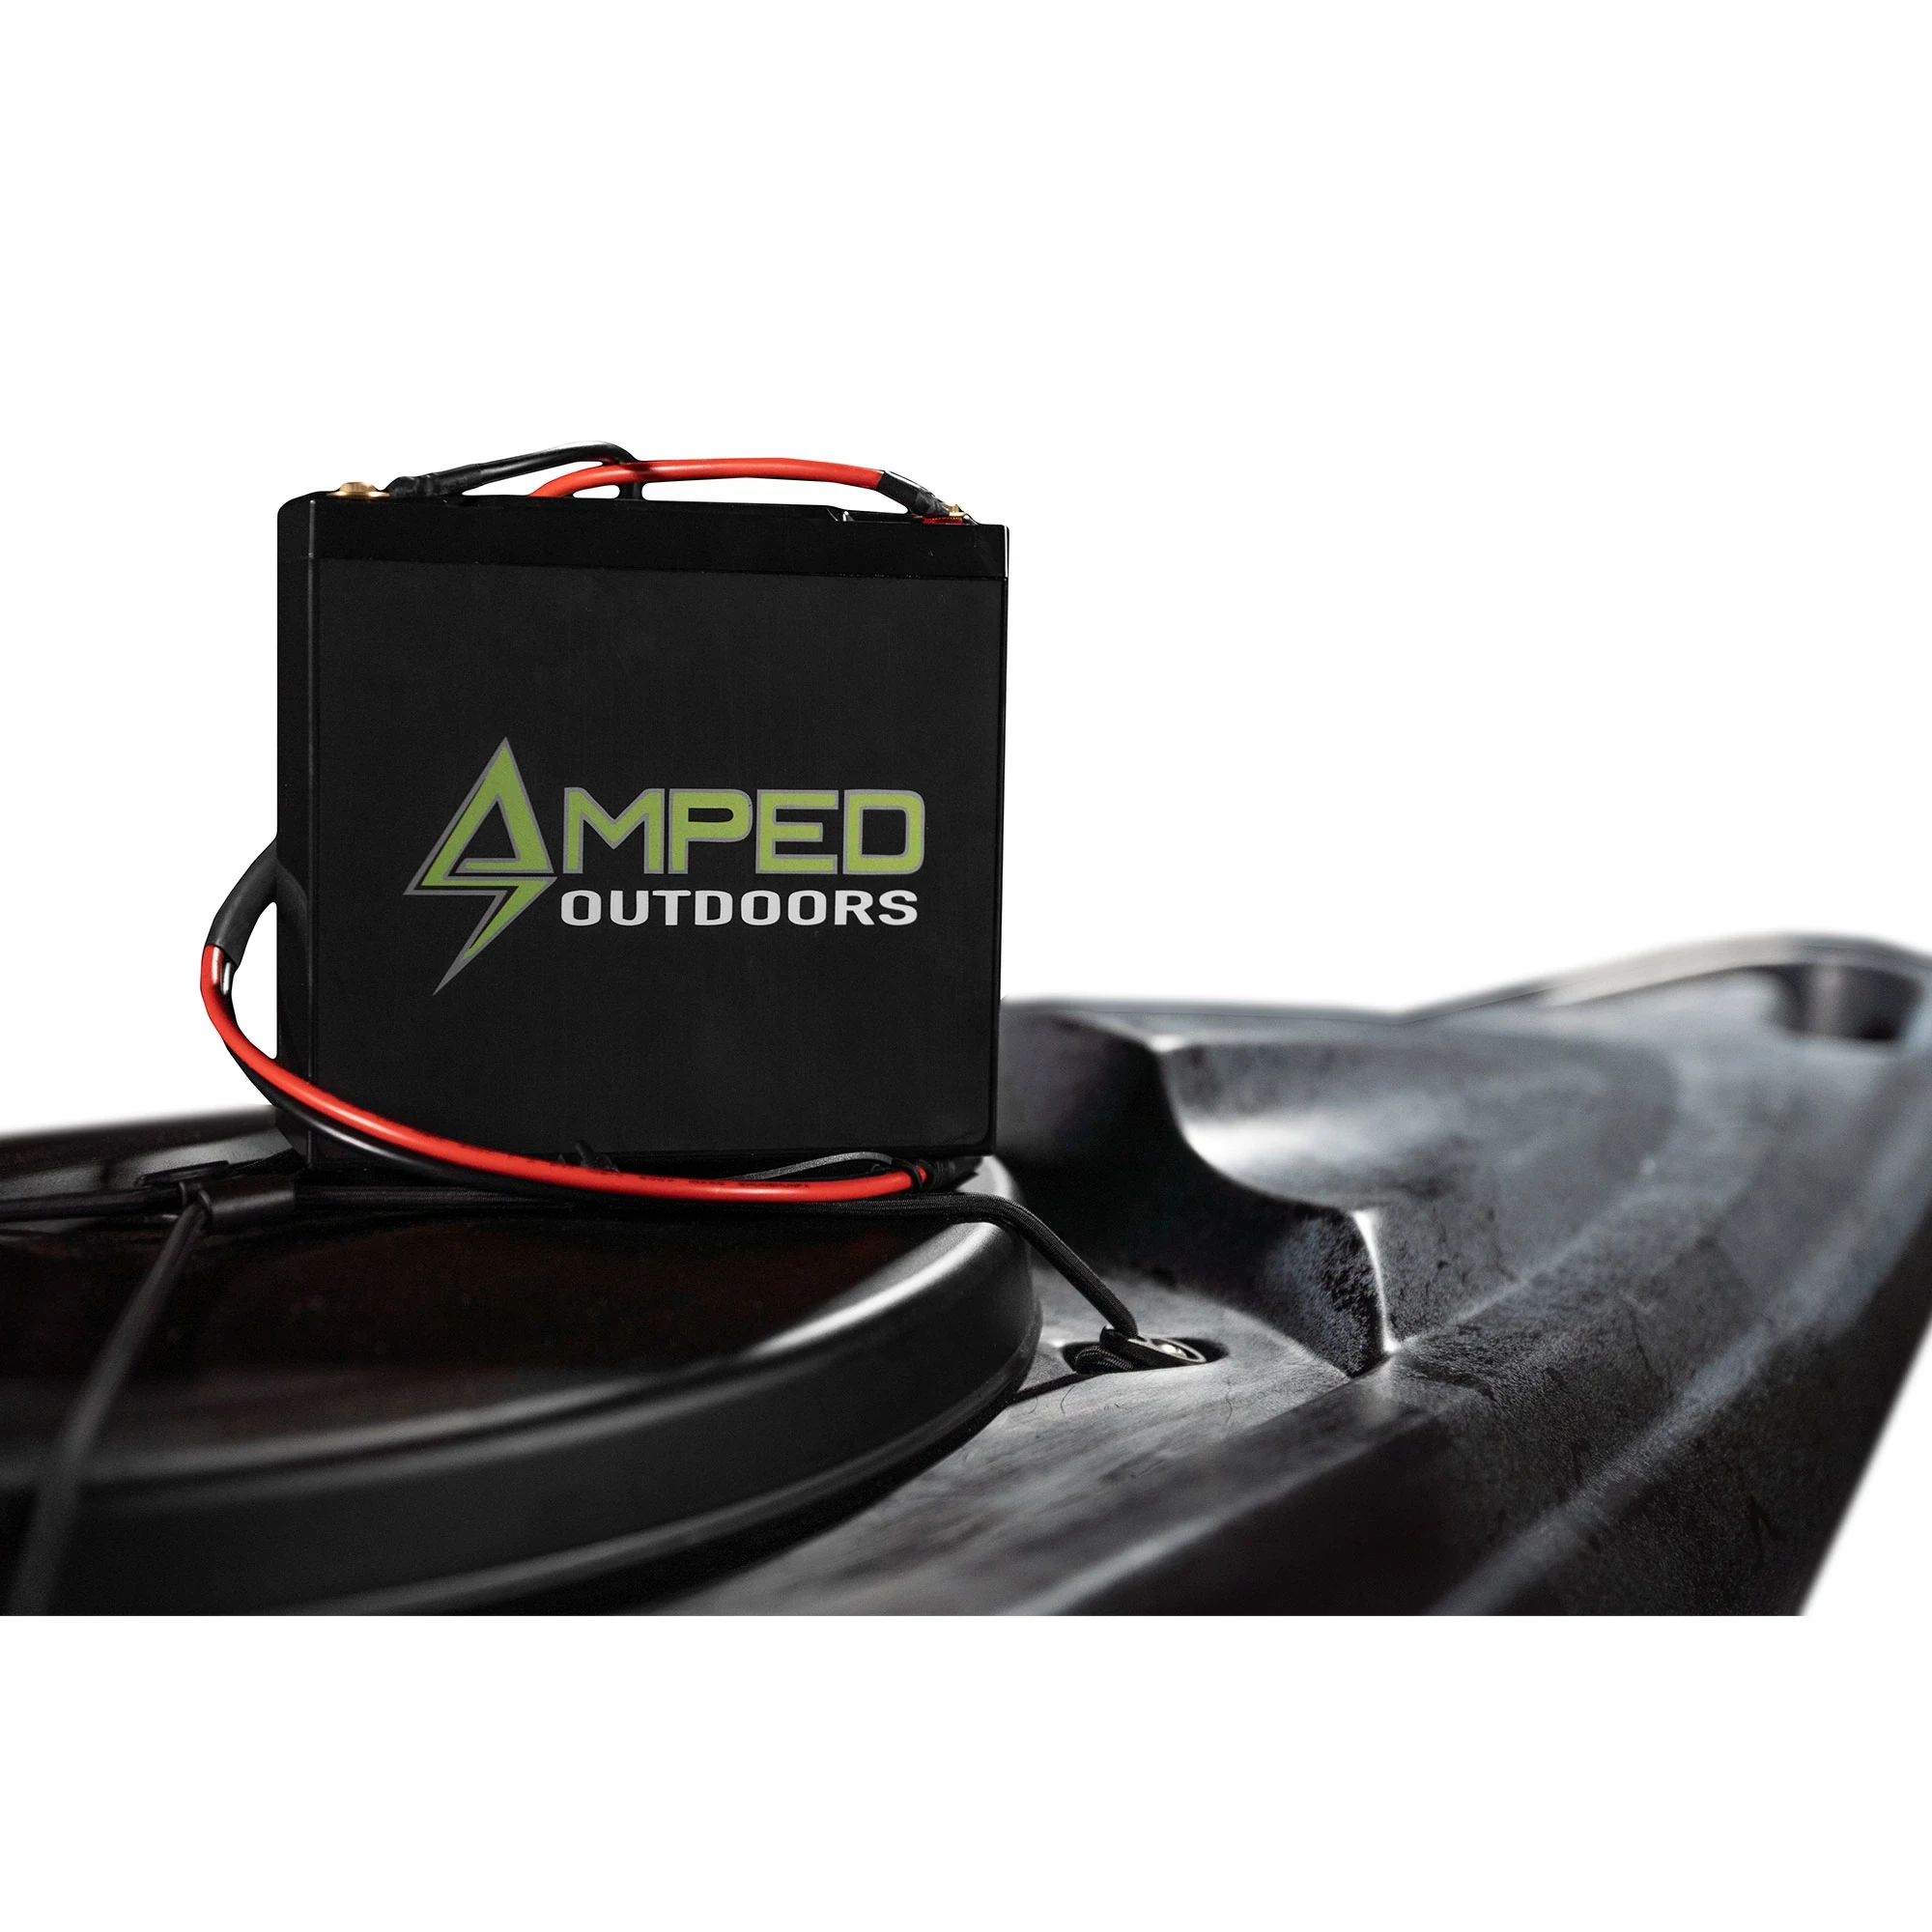 Included 36V Lithium Ion battery from Amped Outdoors